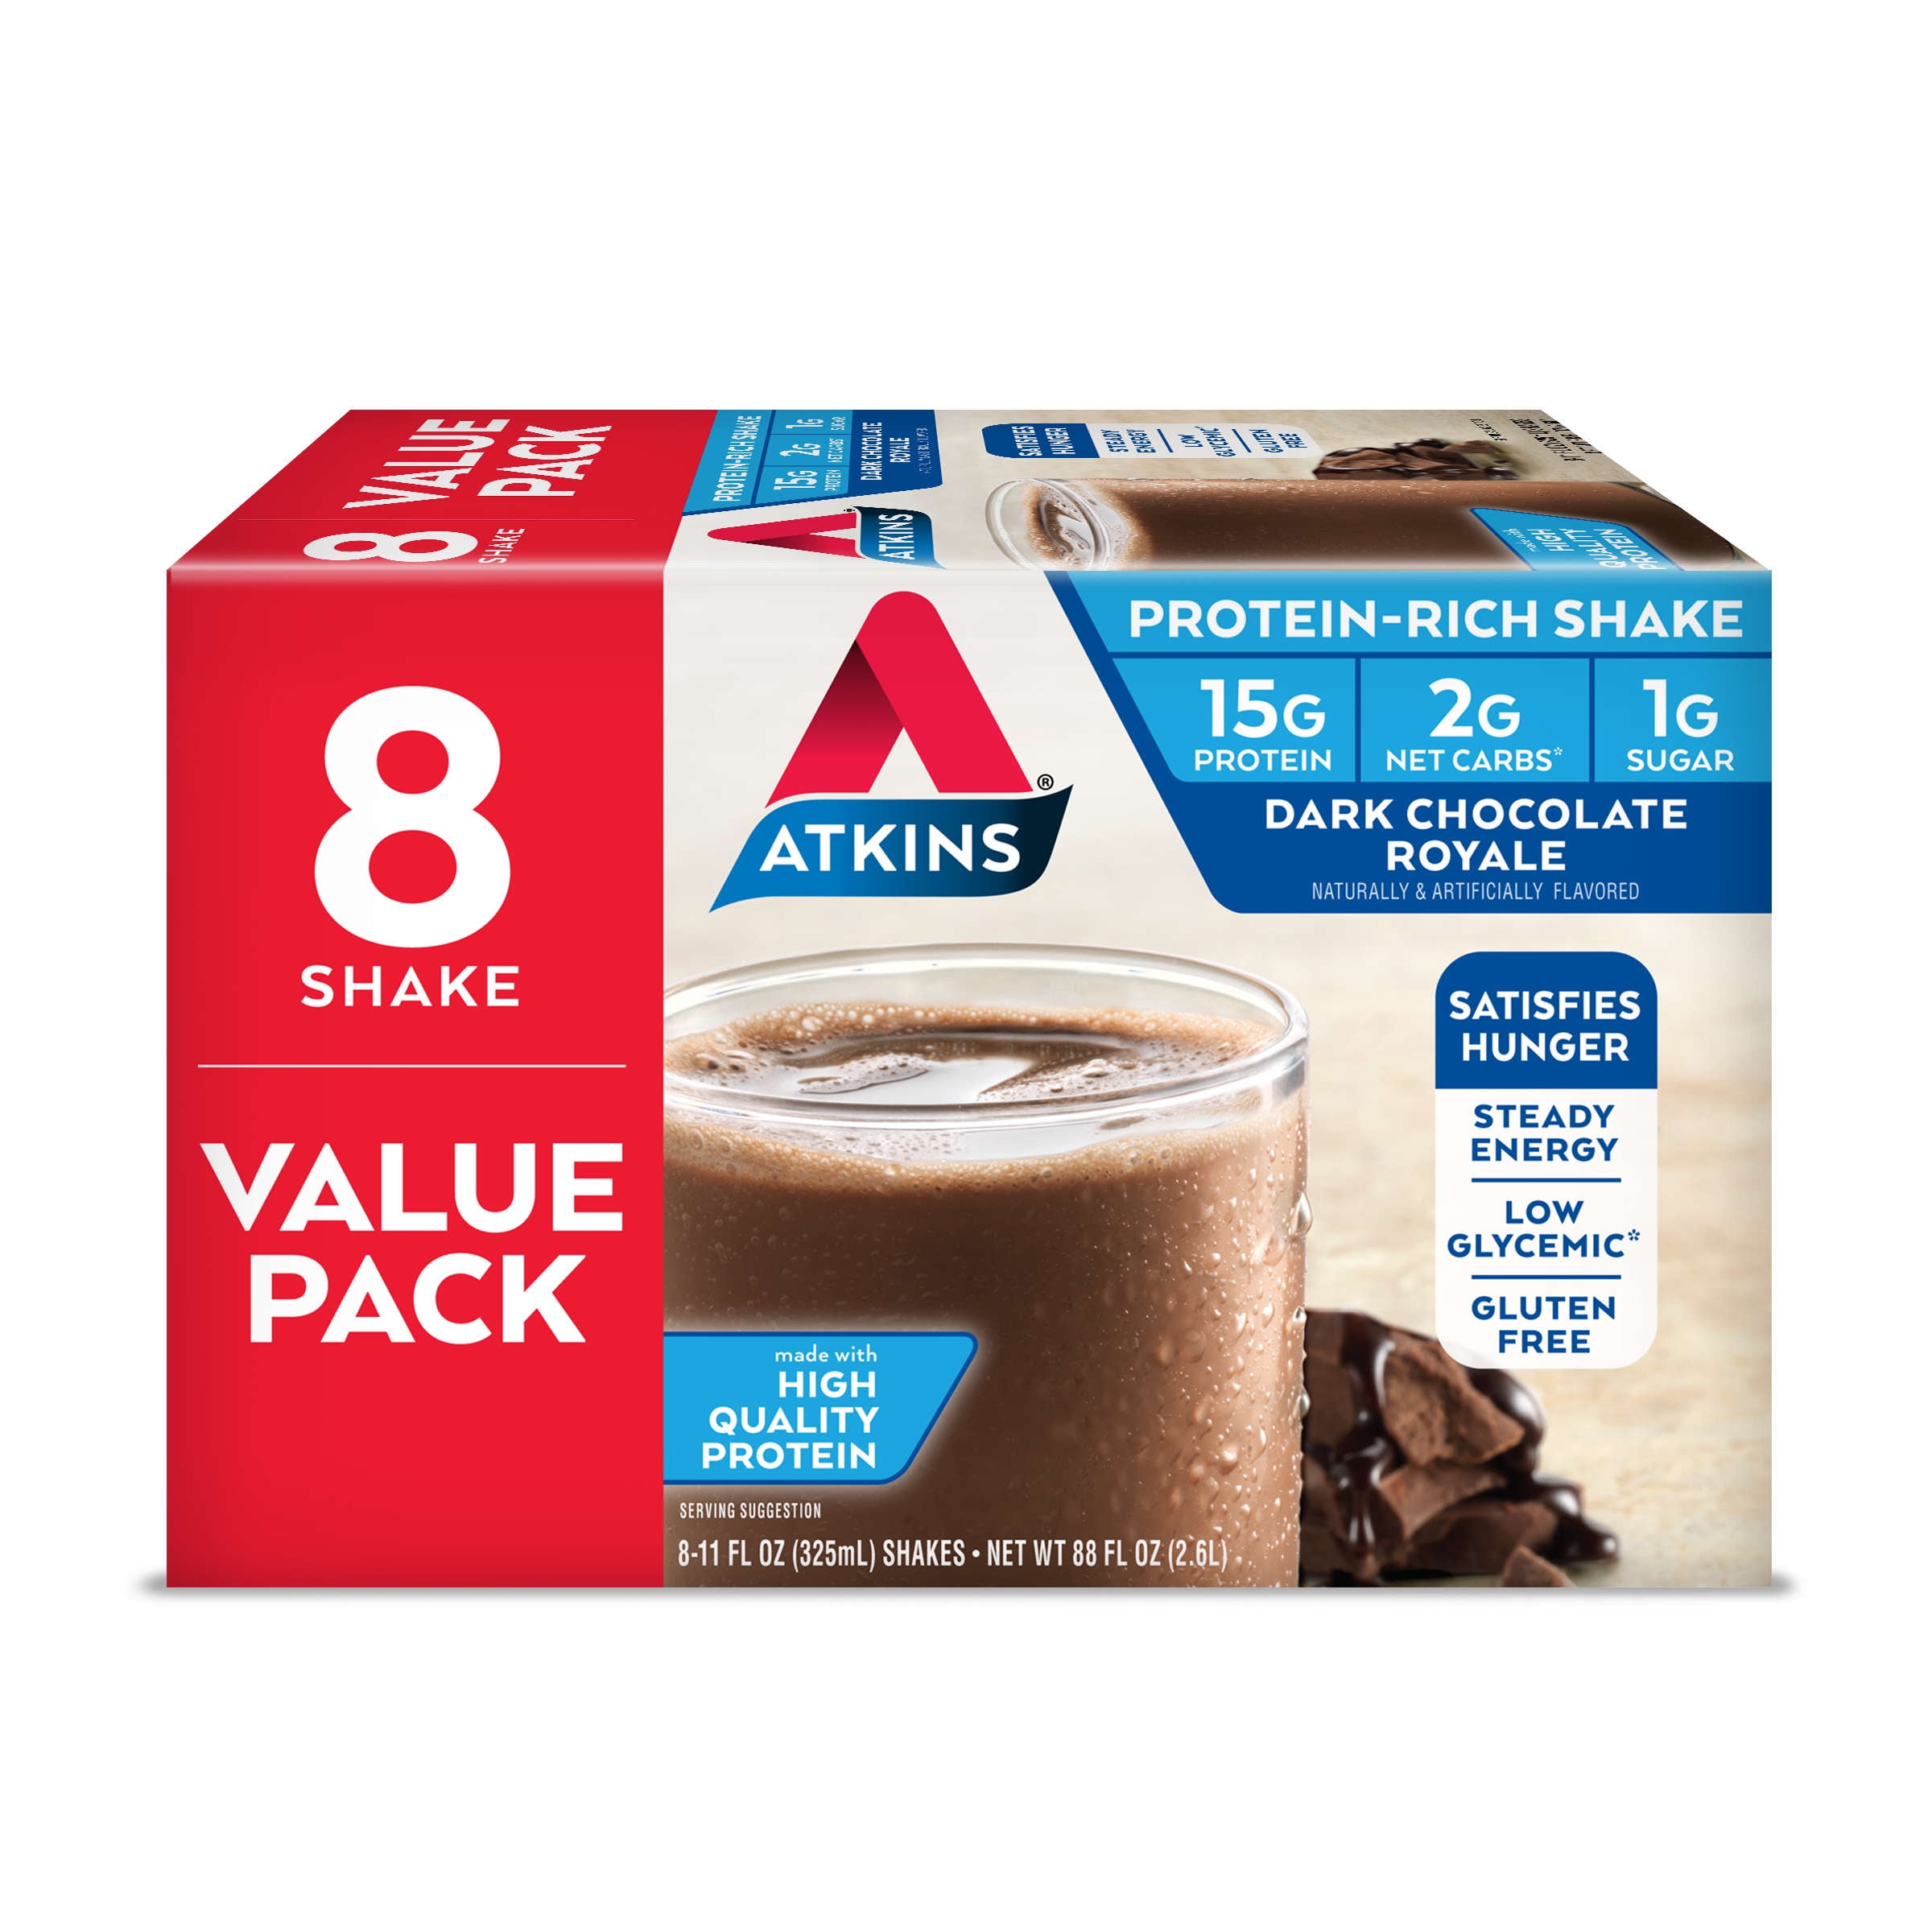 Photo 1 of Atkins Gluten Free Protein-Rich Shake, Dark Chocolate Royale, Keto Friendly, 8 Count (Ready to Drink)
BEST BY: 04/05/2022